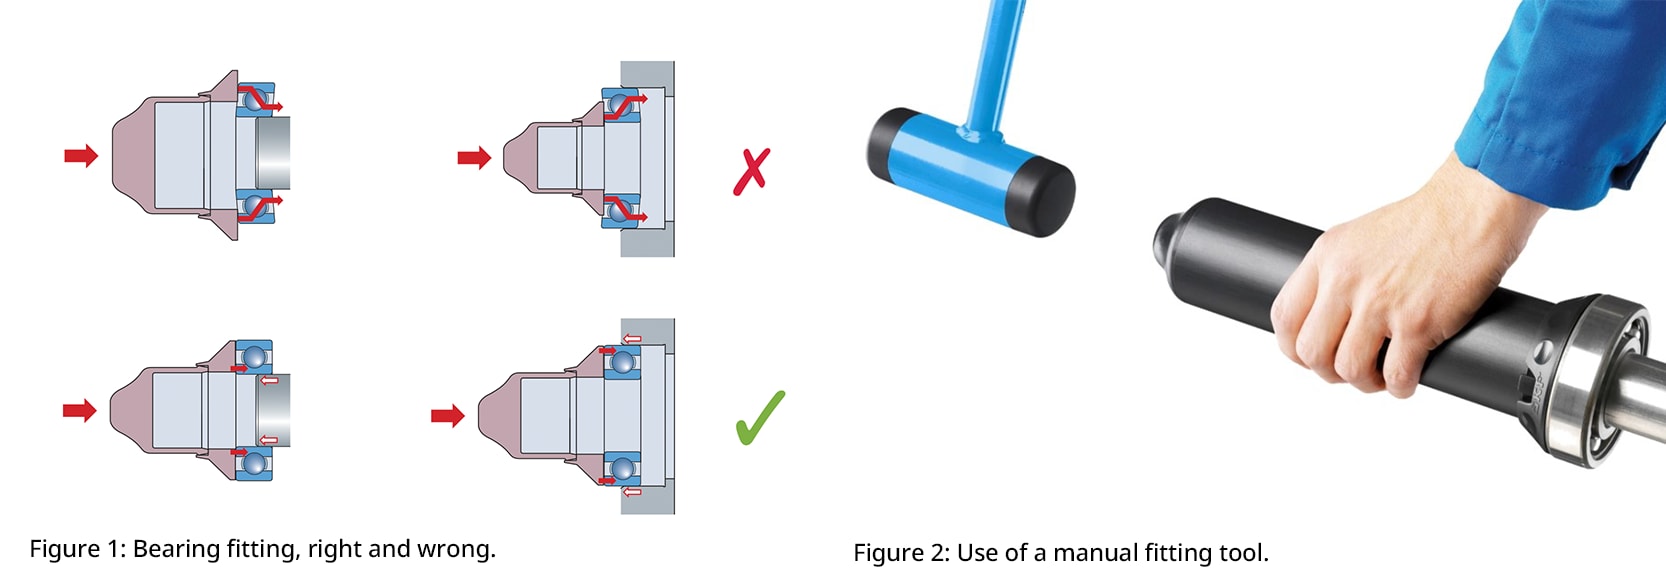 Shows incorrect and correct ways of applying force to fit bearing correctly